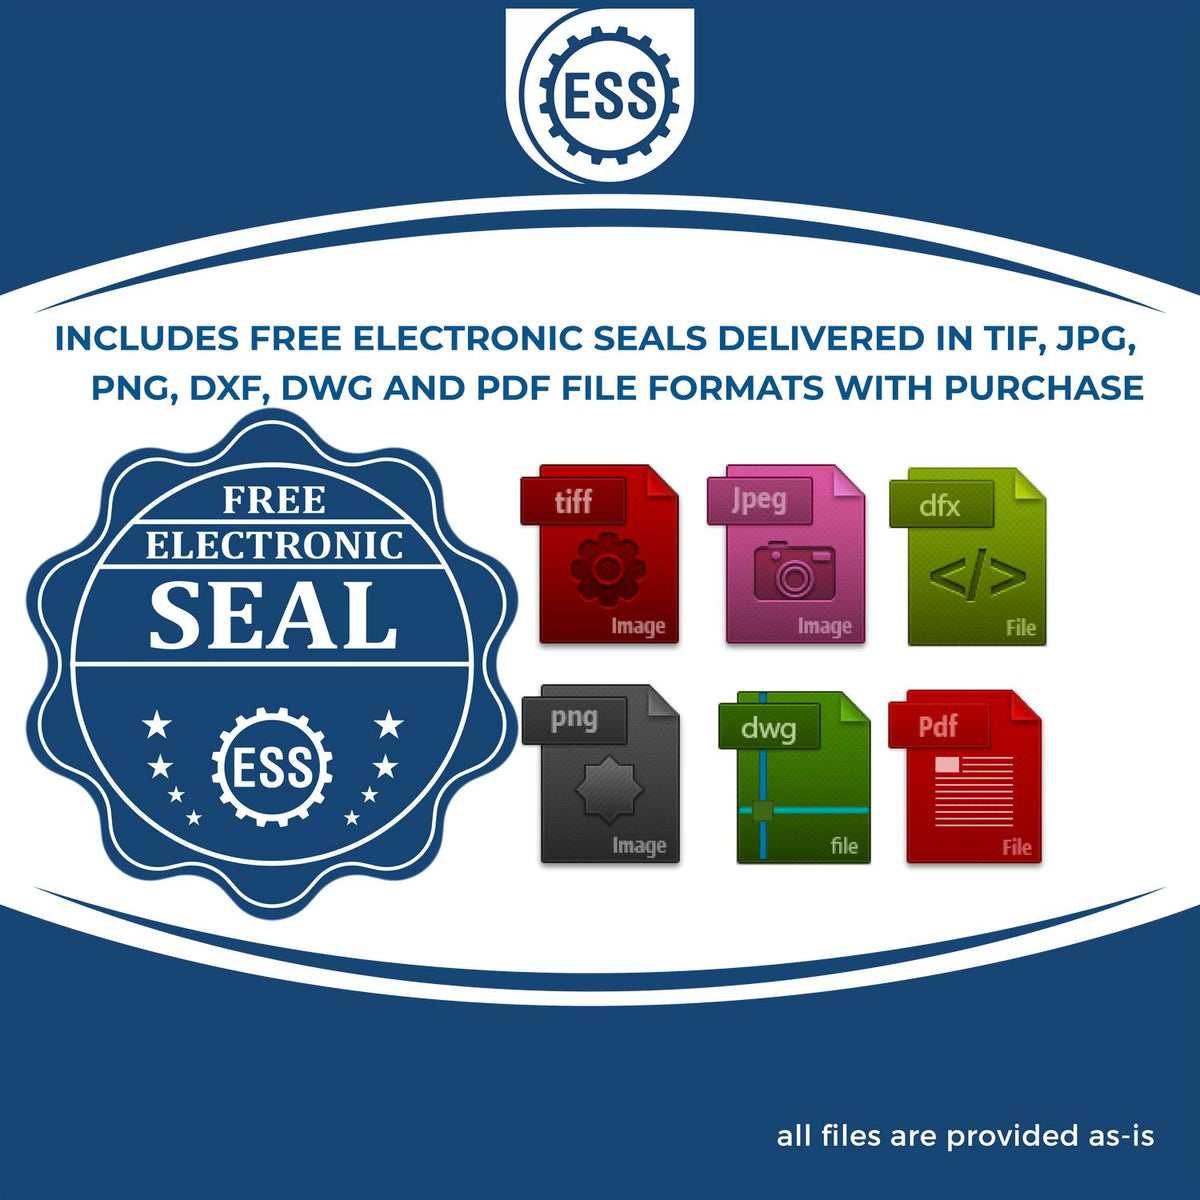 An infographic for the free electronic seal for the Slim Pre-Inked Florida Architect Seal Stamp illustrating the different file type icons such as DXF, DWG, TIF, JPG and PNG.